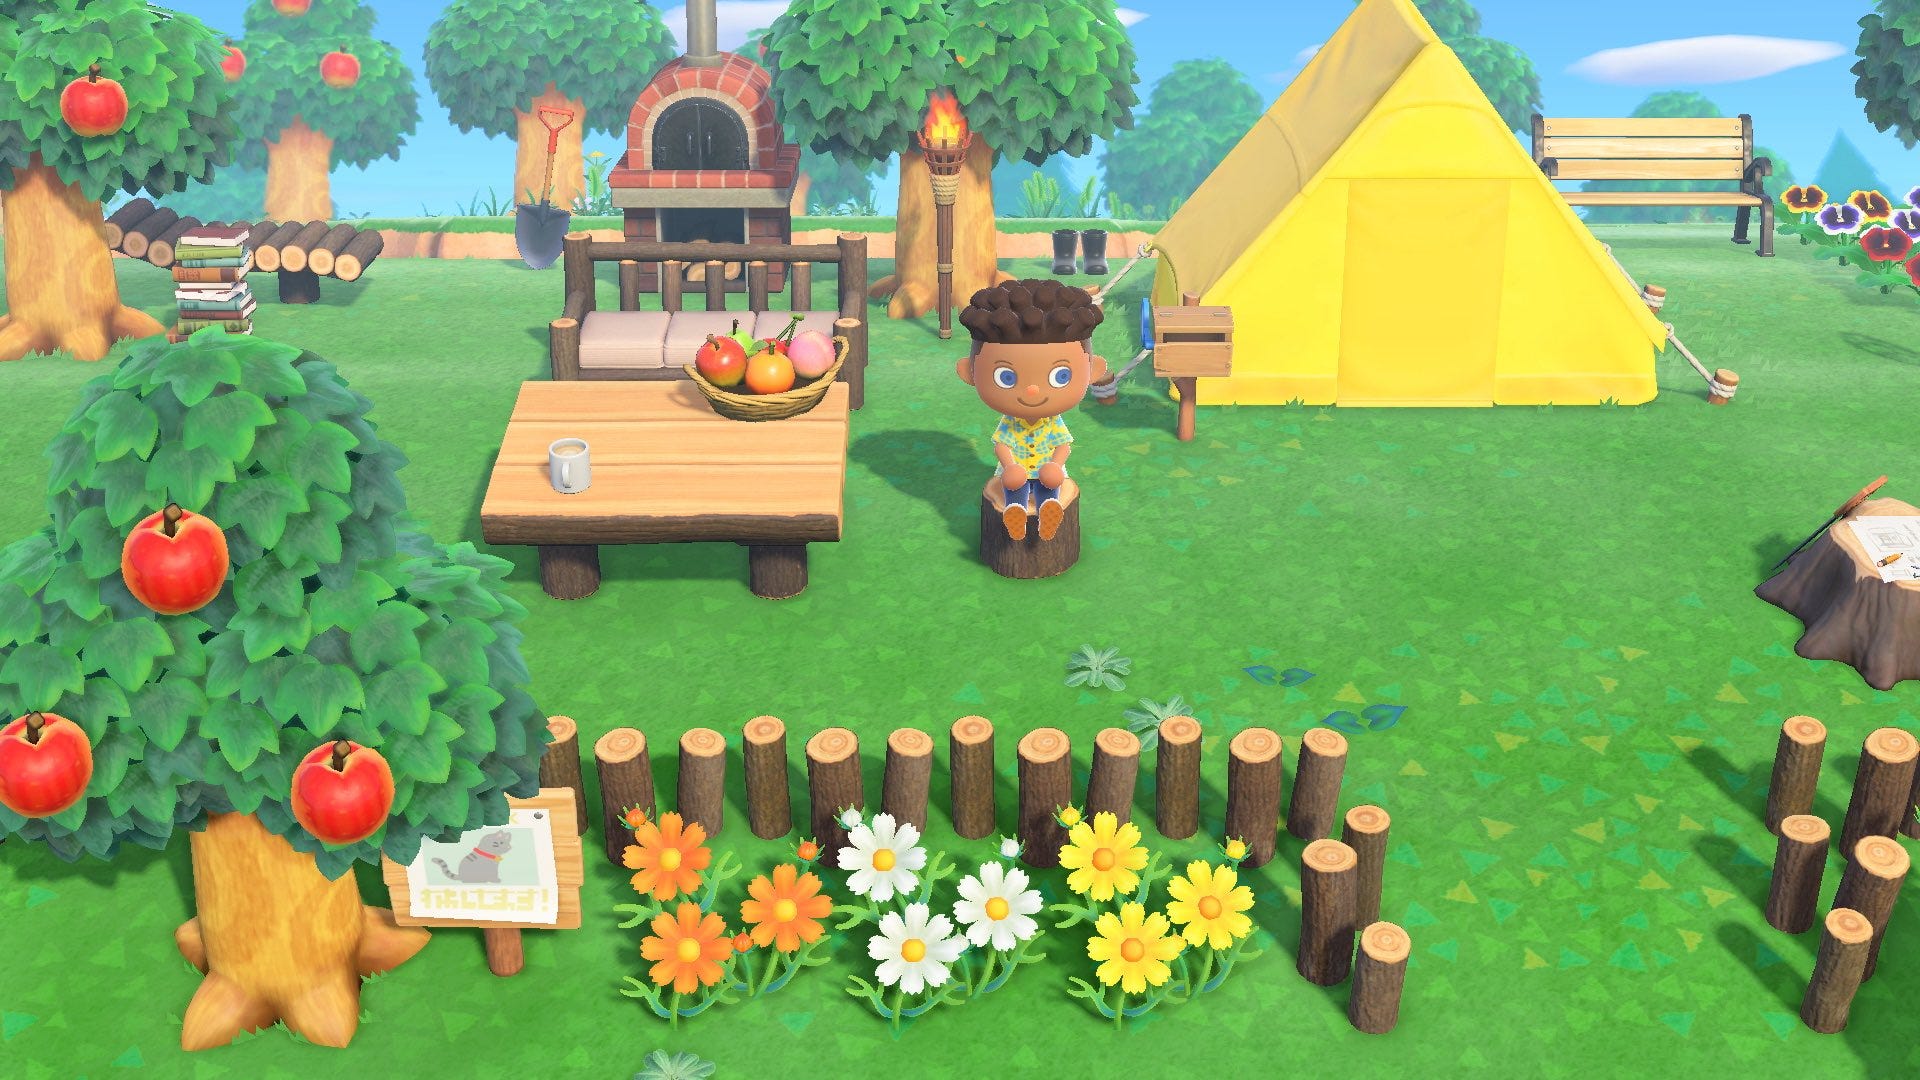 current version of animal crossing new horizons